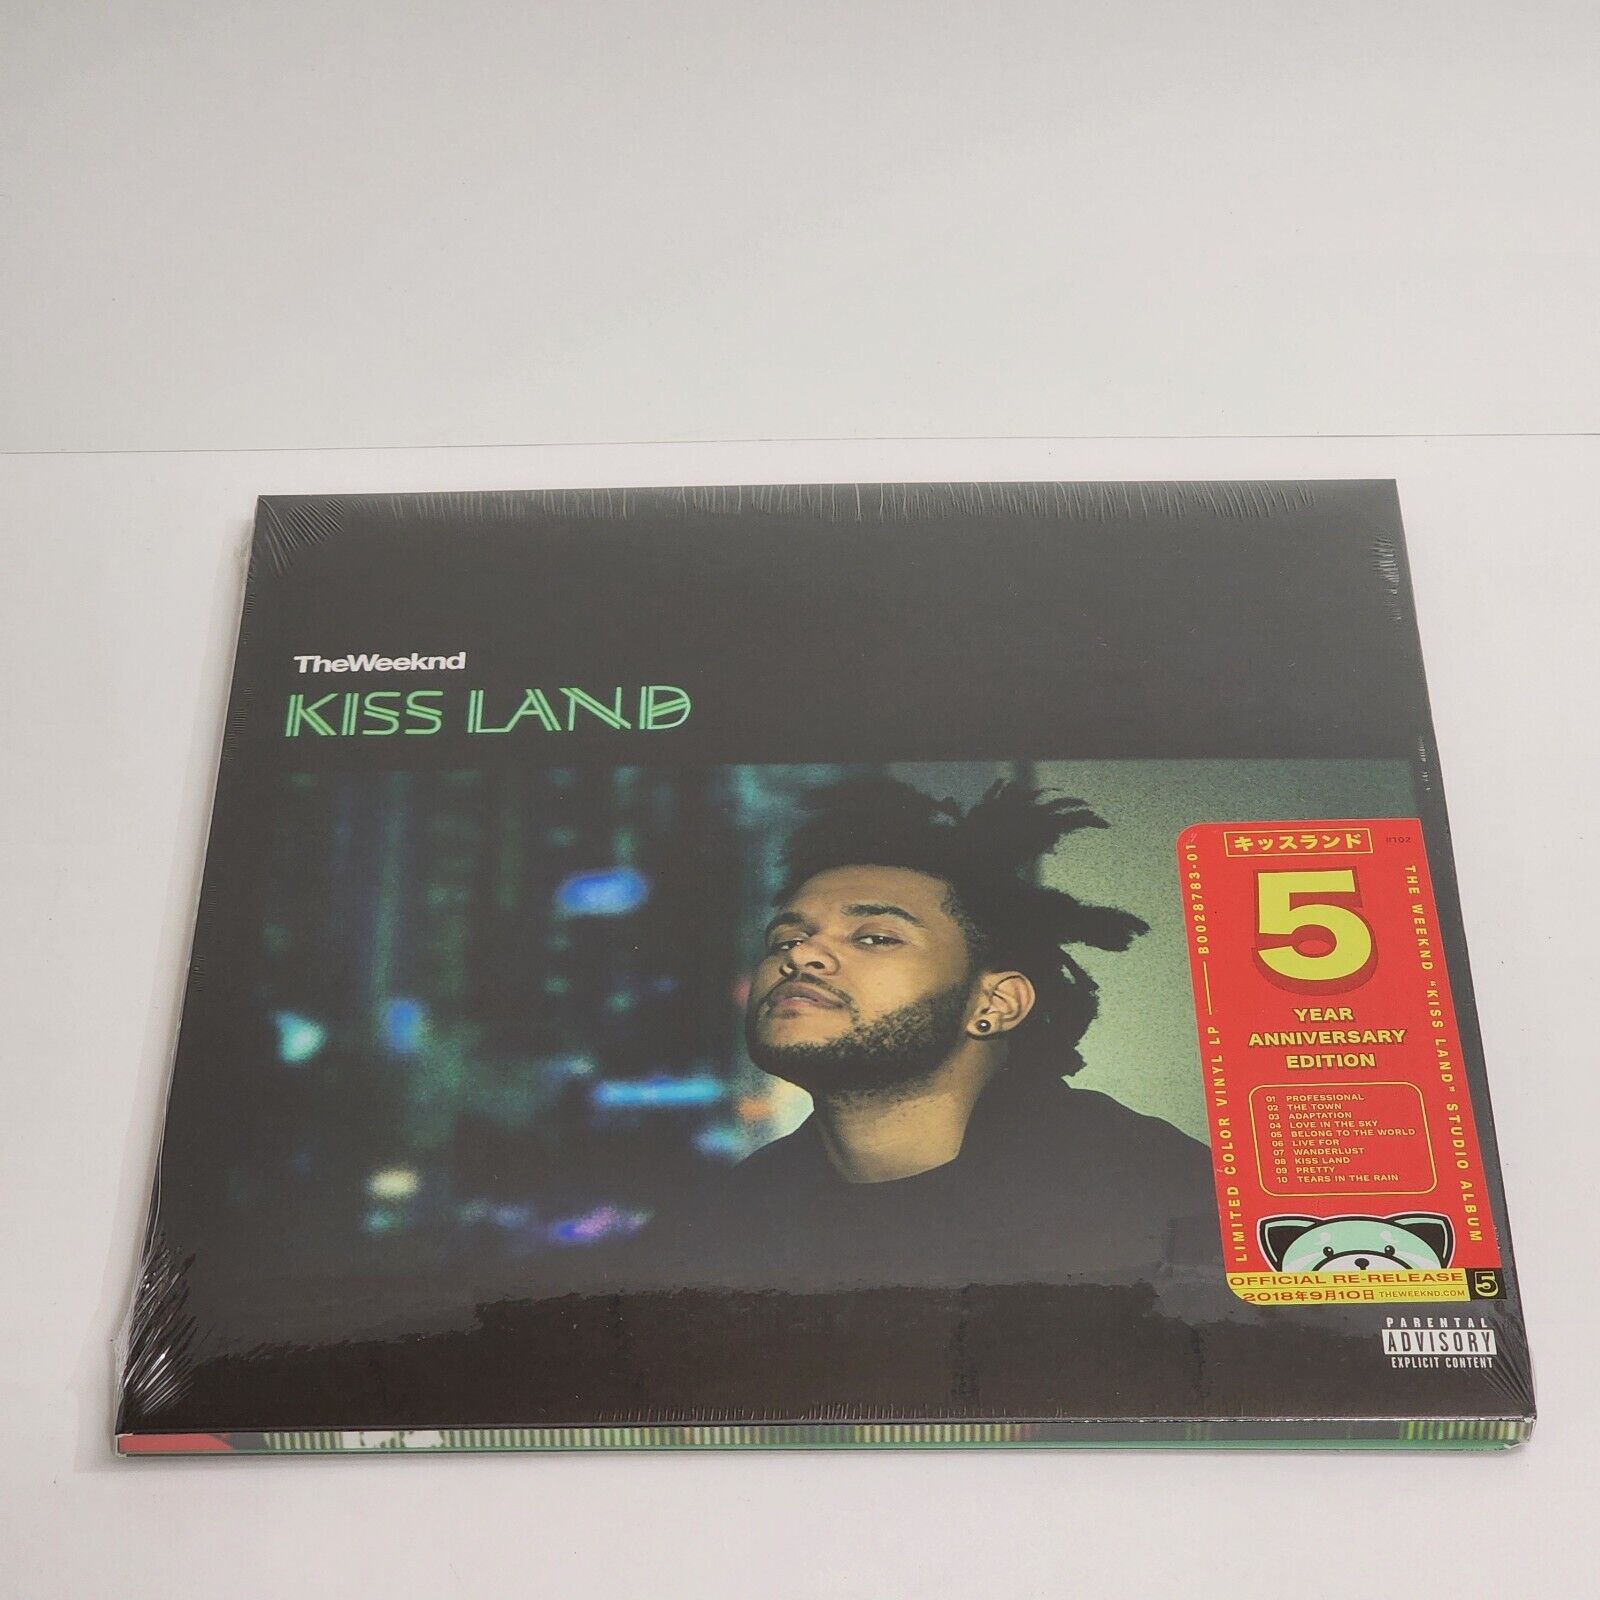 The Weeknd Kiss Land 5 Year Anniversary Edition Seaglass Colored Vinyl